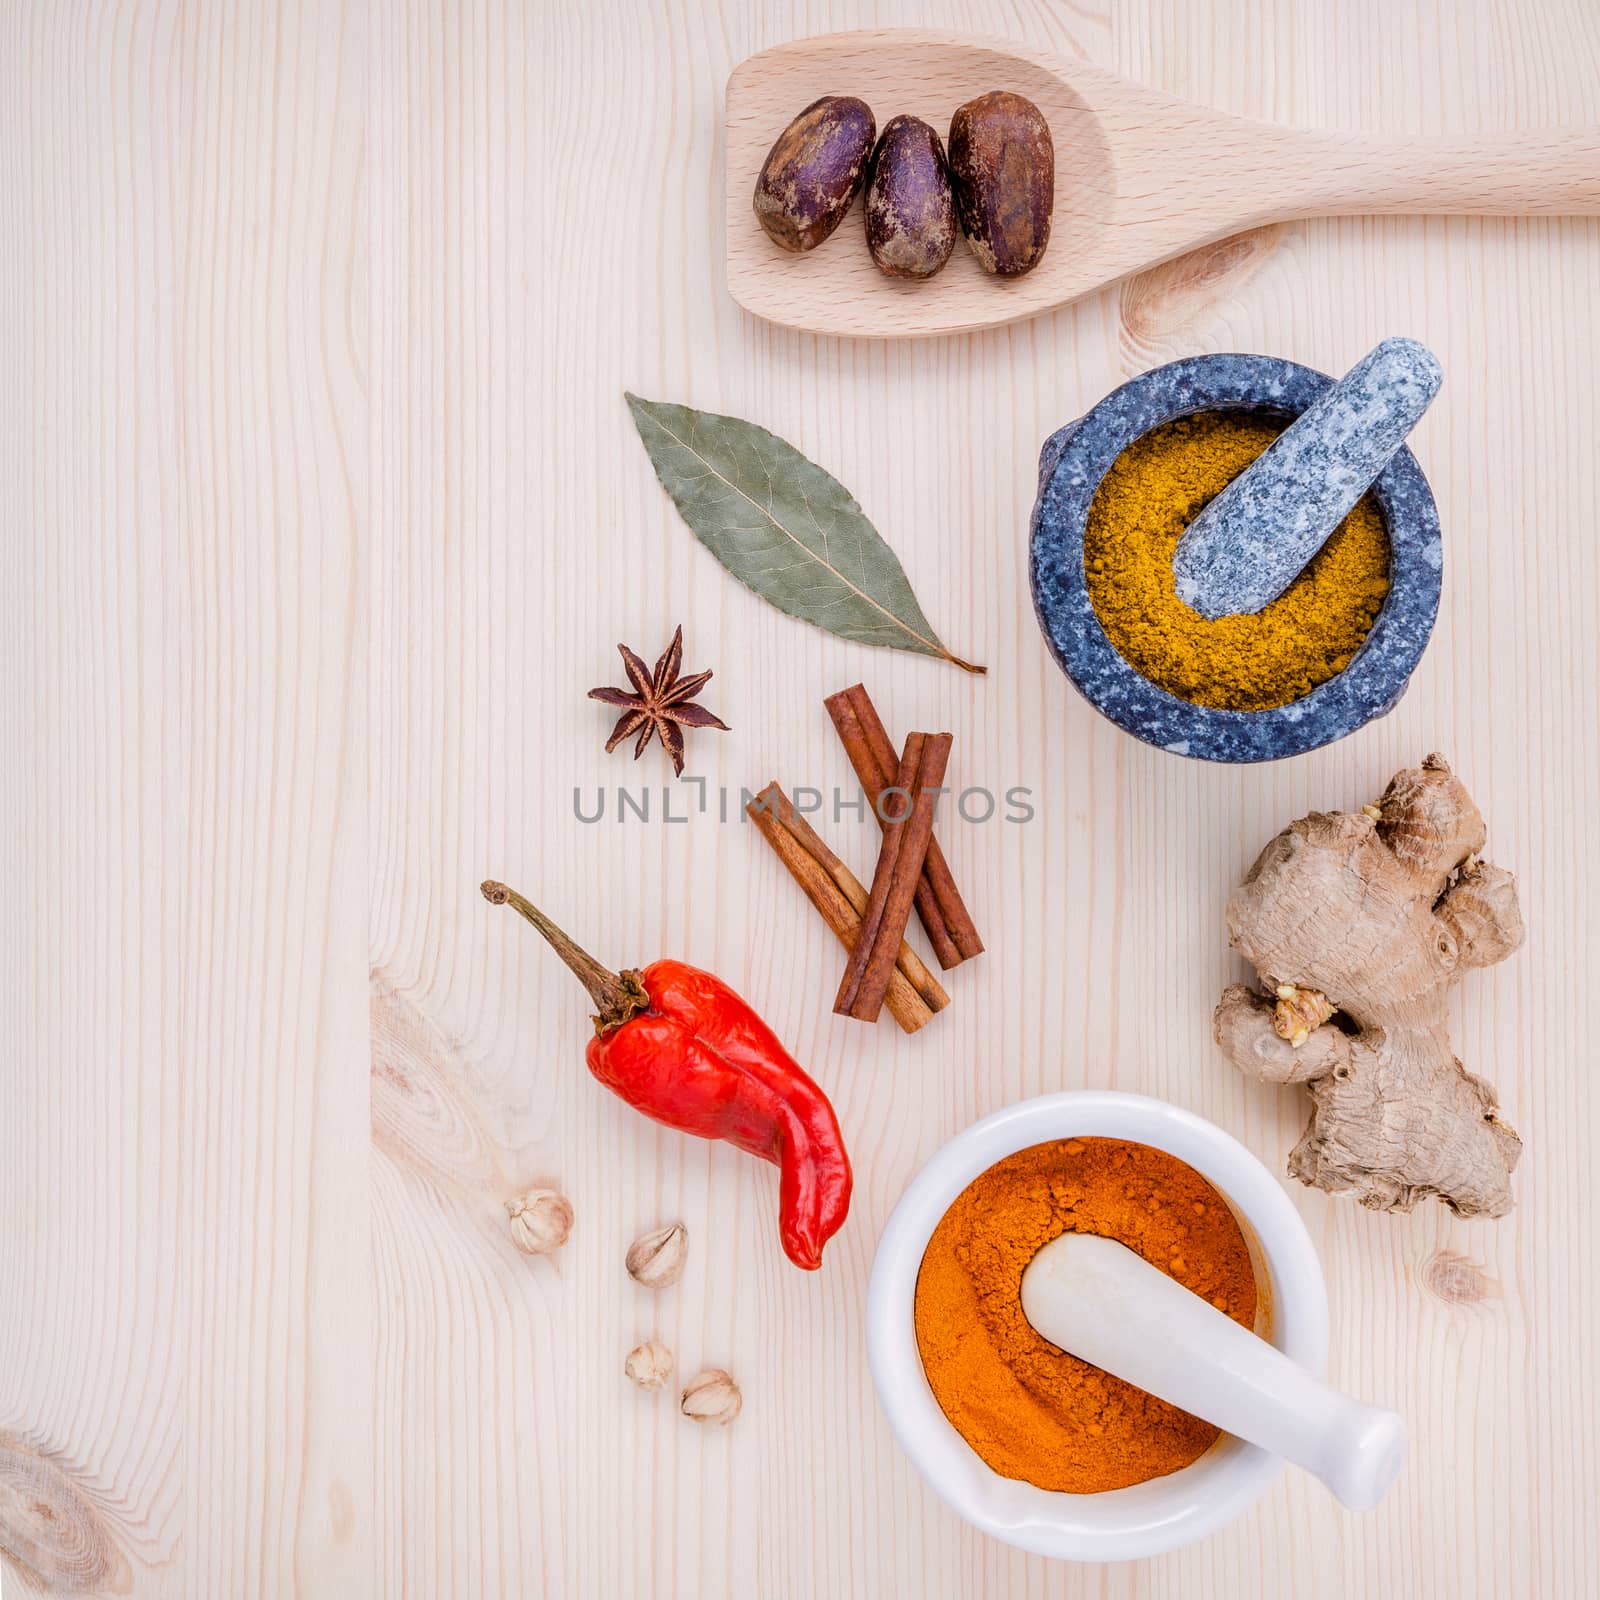 Dried herbs and spices nutmeg,star anise ,cinnamon stick ,ginger ,bay leaves and chili on wooden table. Top view with copy space.